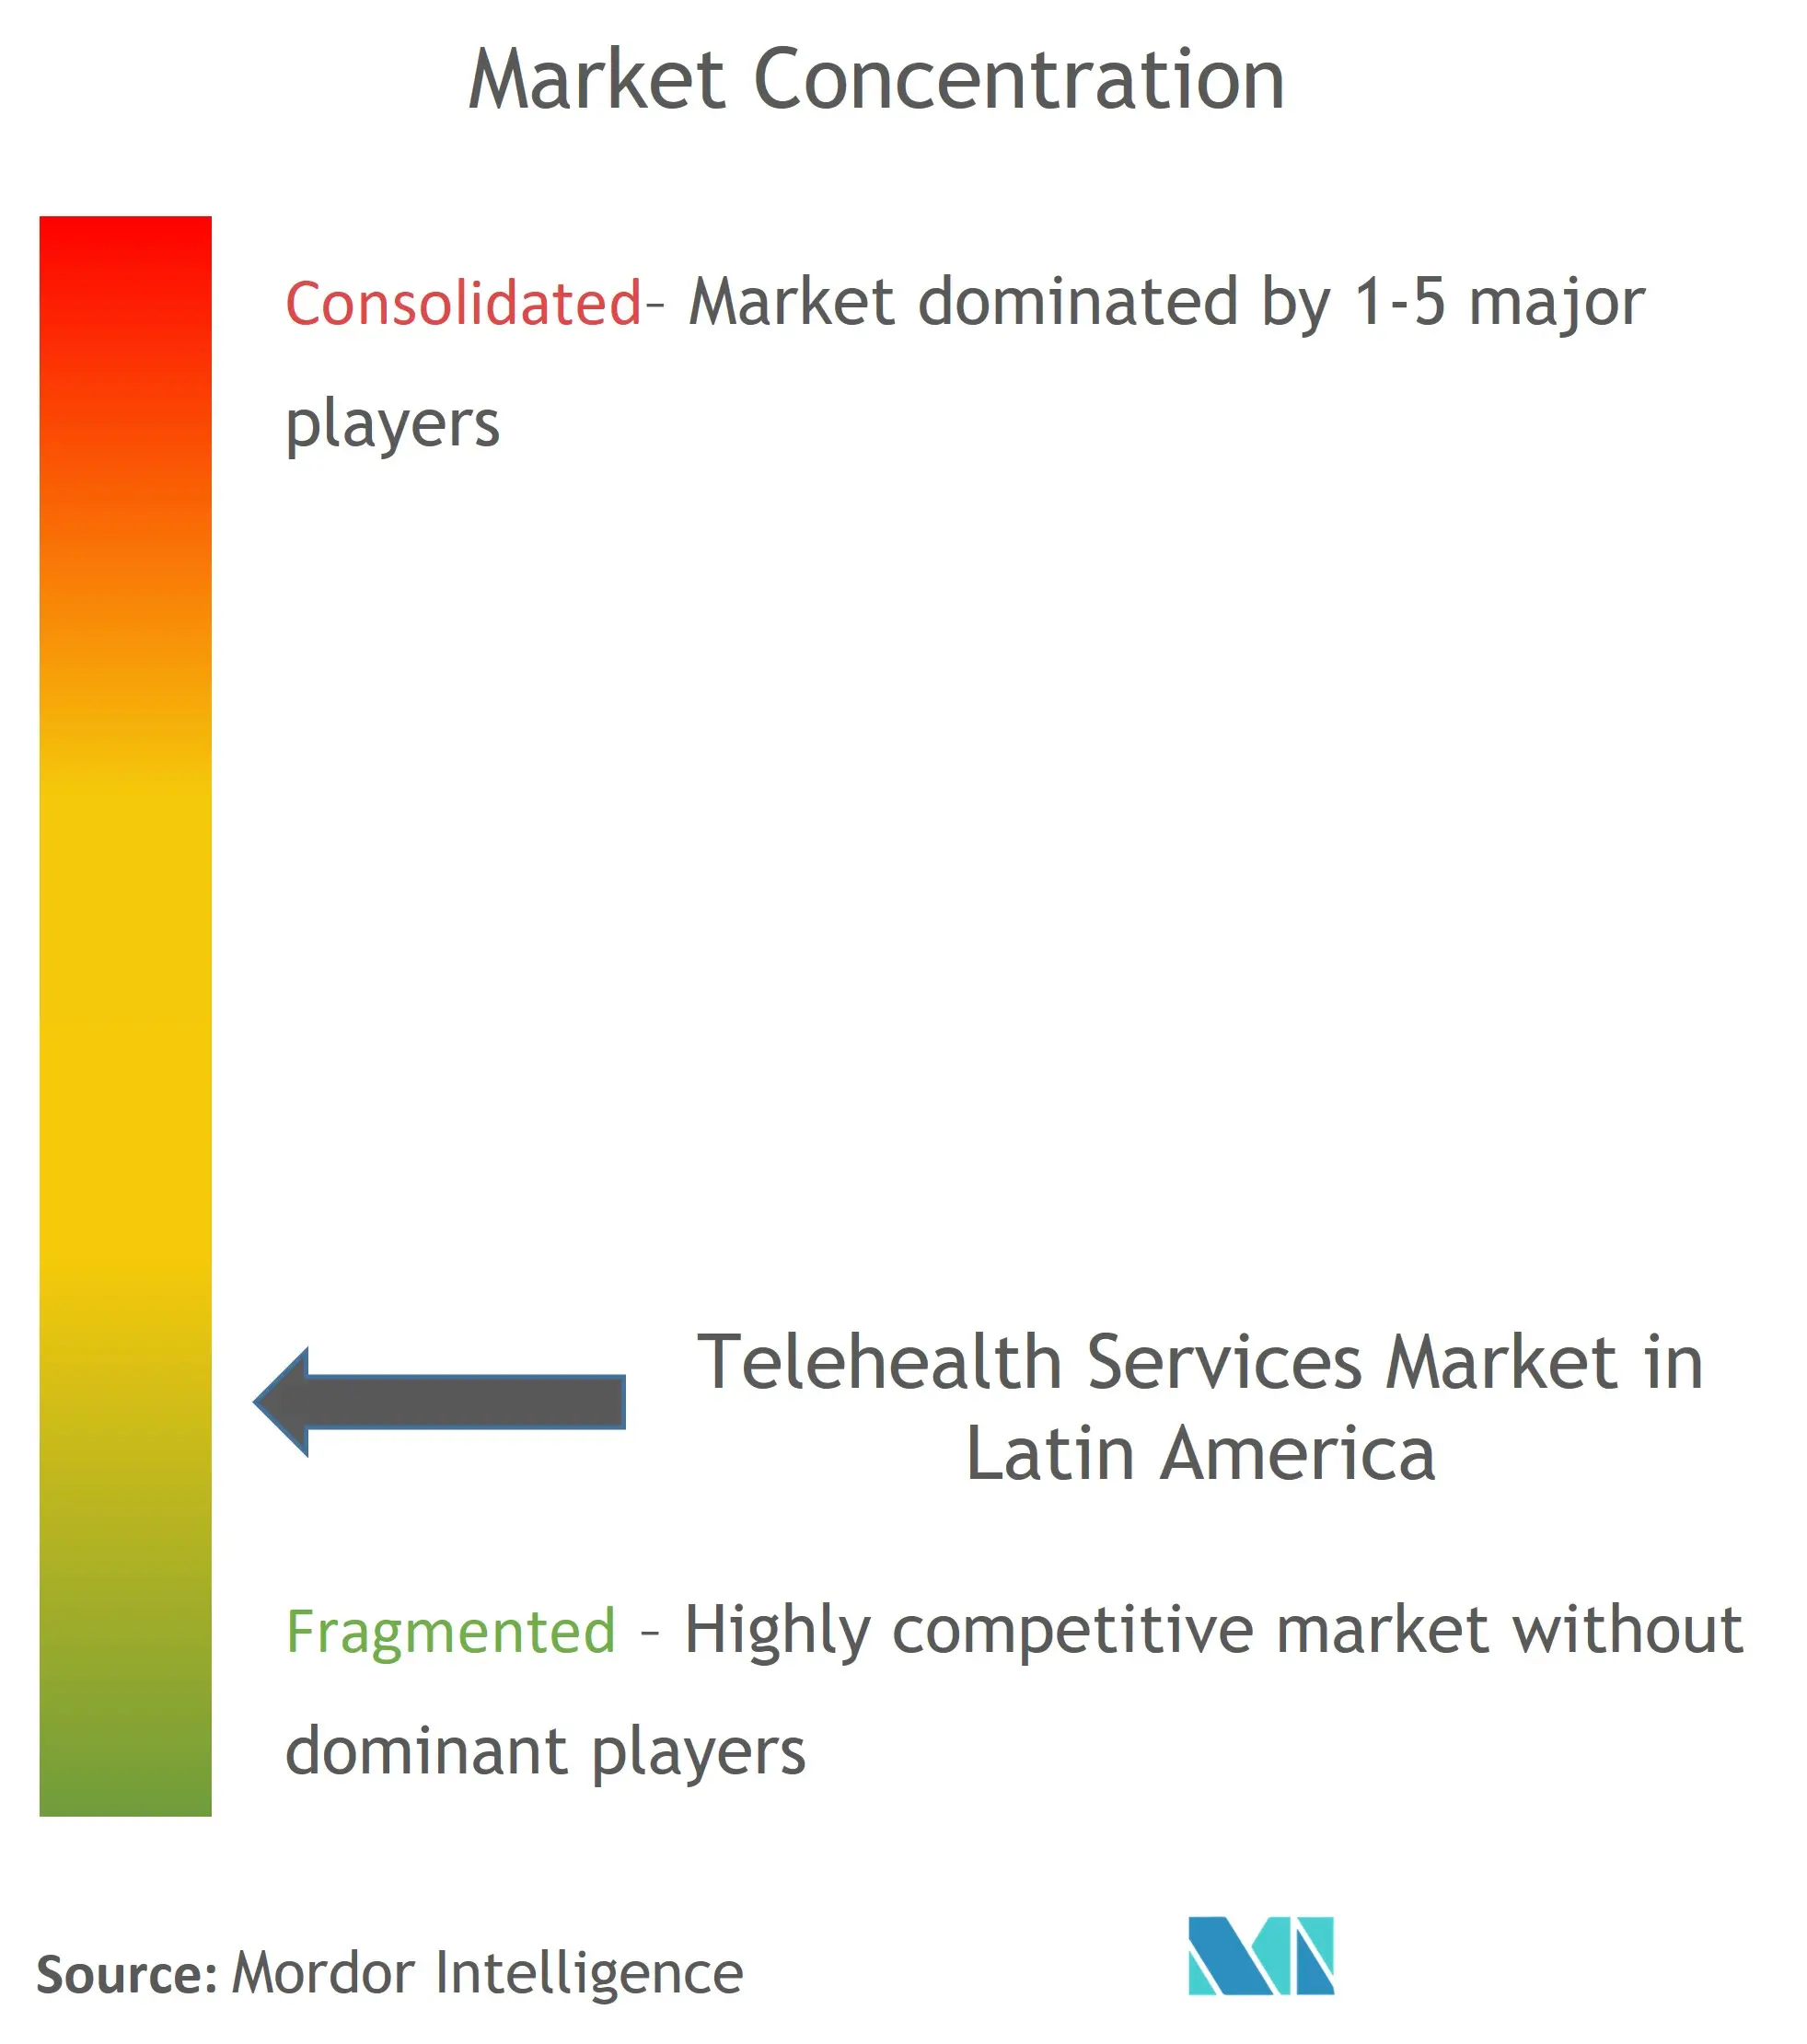 Telehealth Services Market in Latin America Concentration